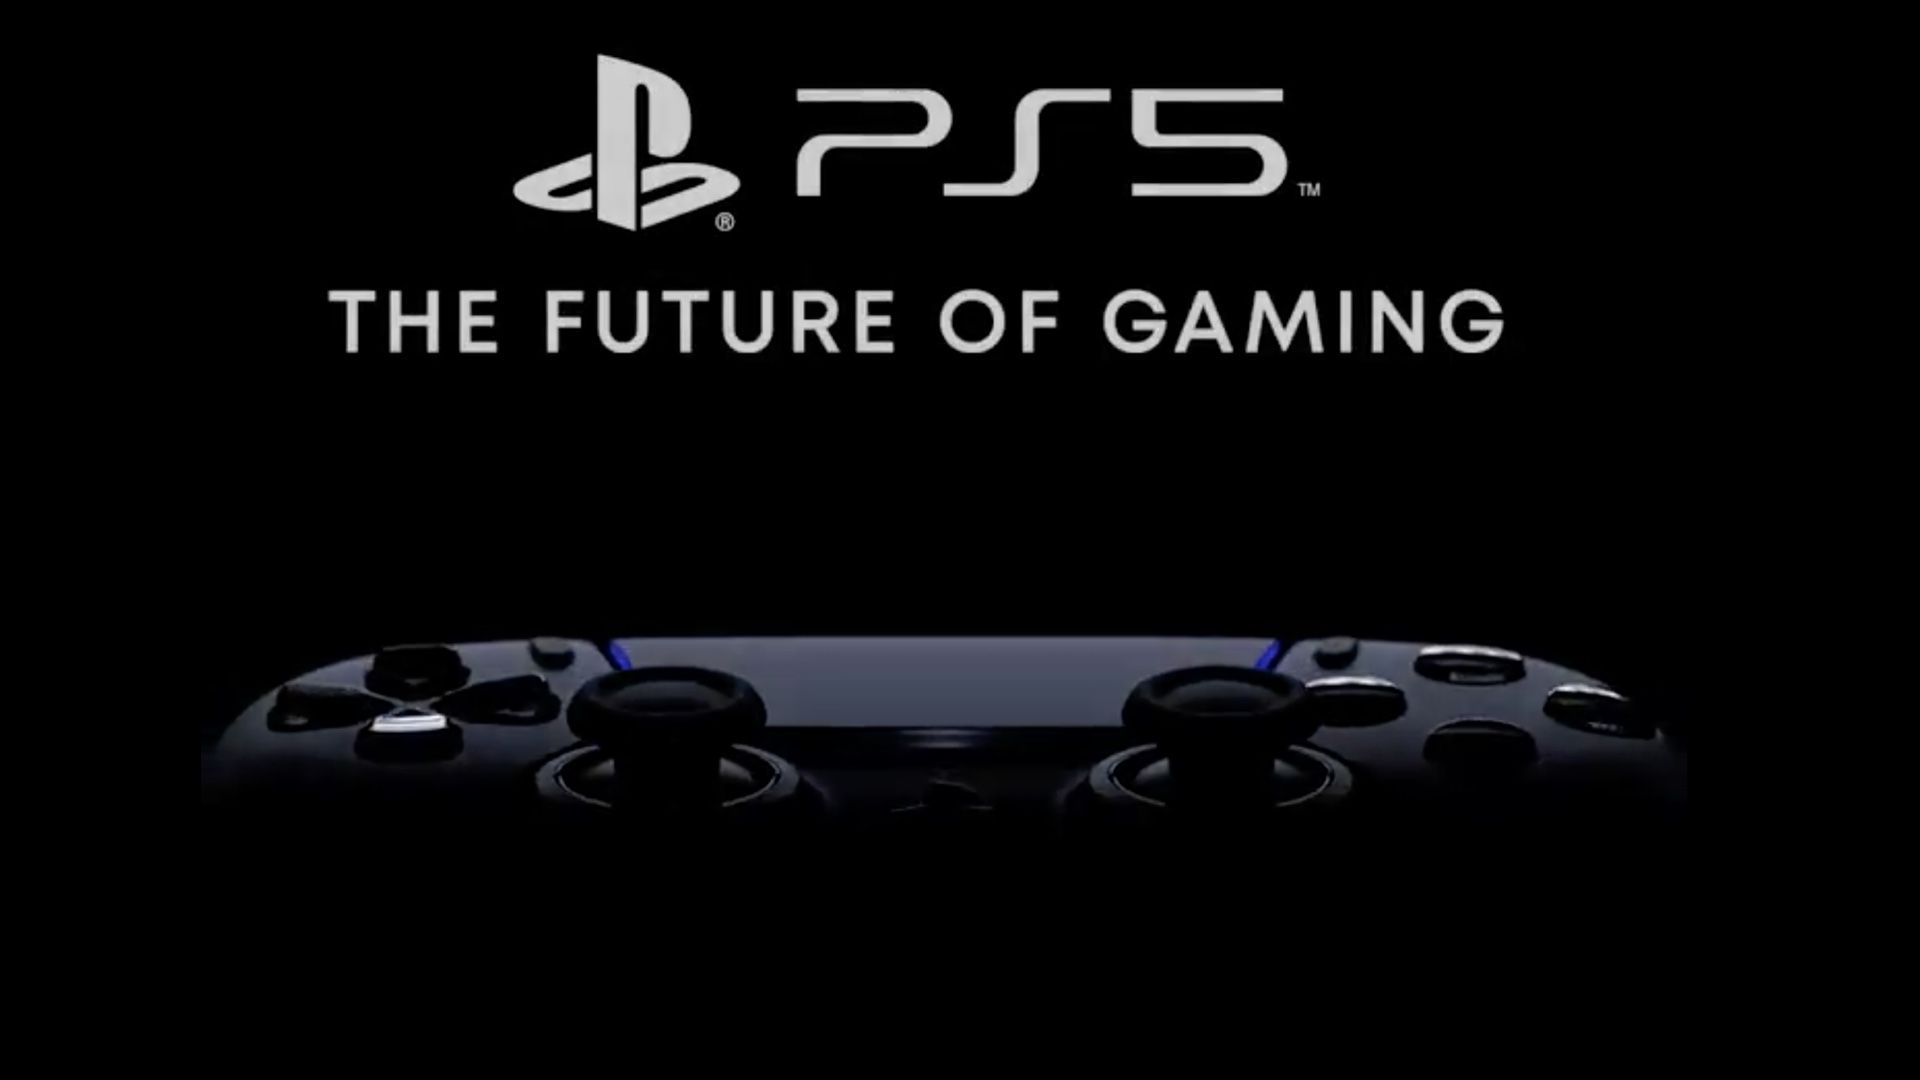 PS5 price: it won't be cheap, according to PlayStation CEO